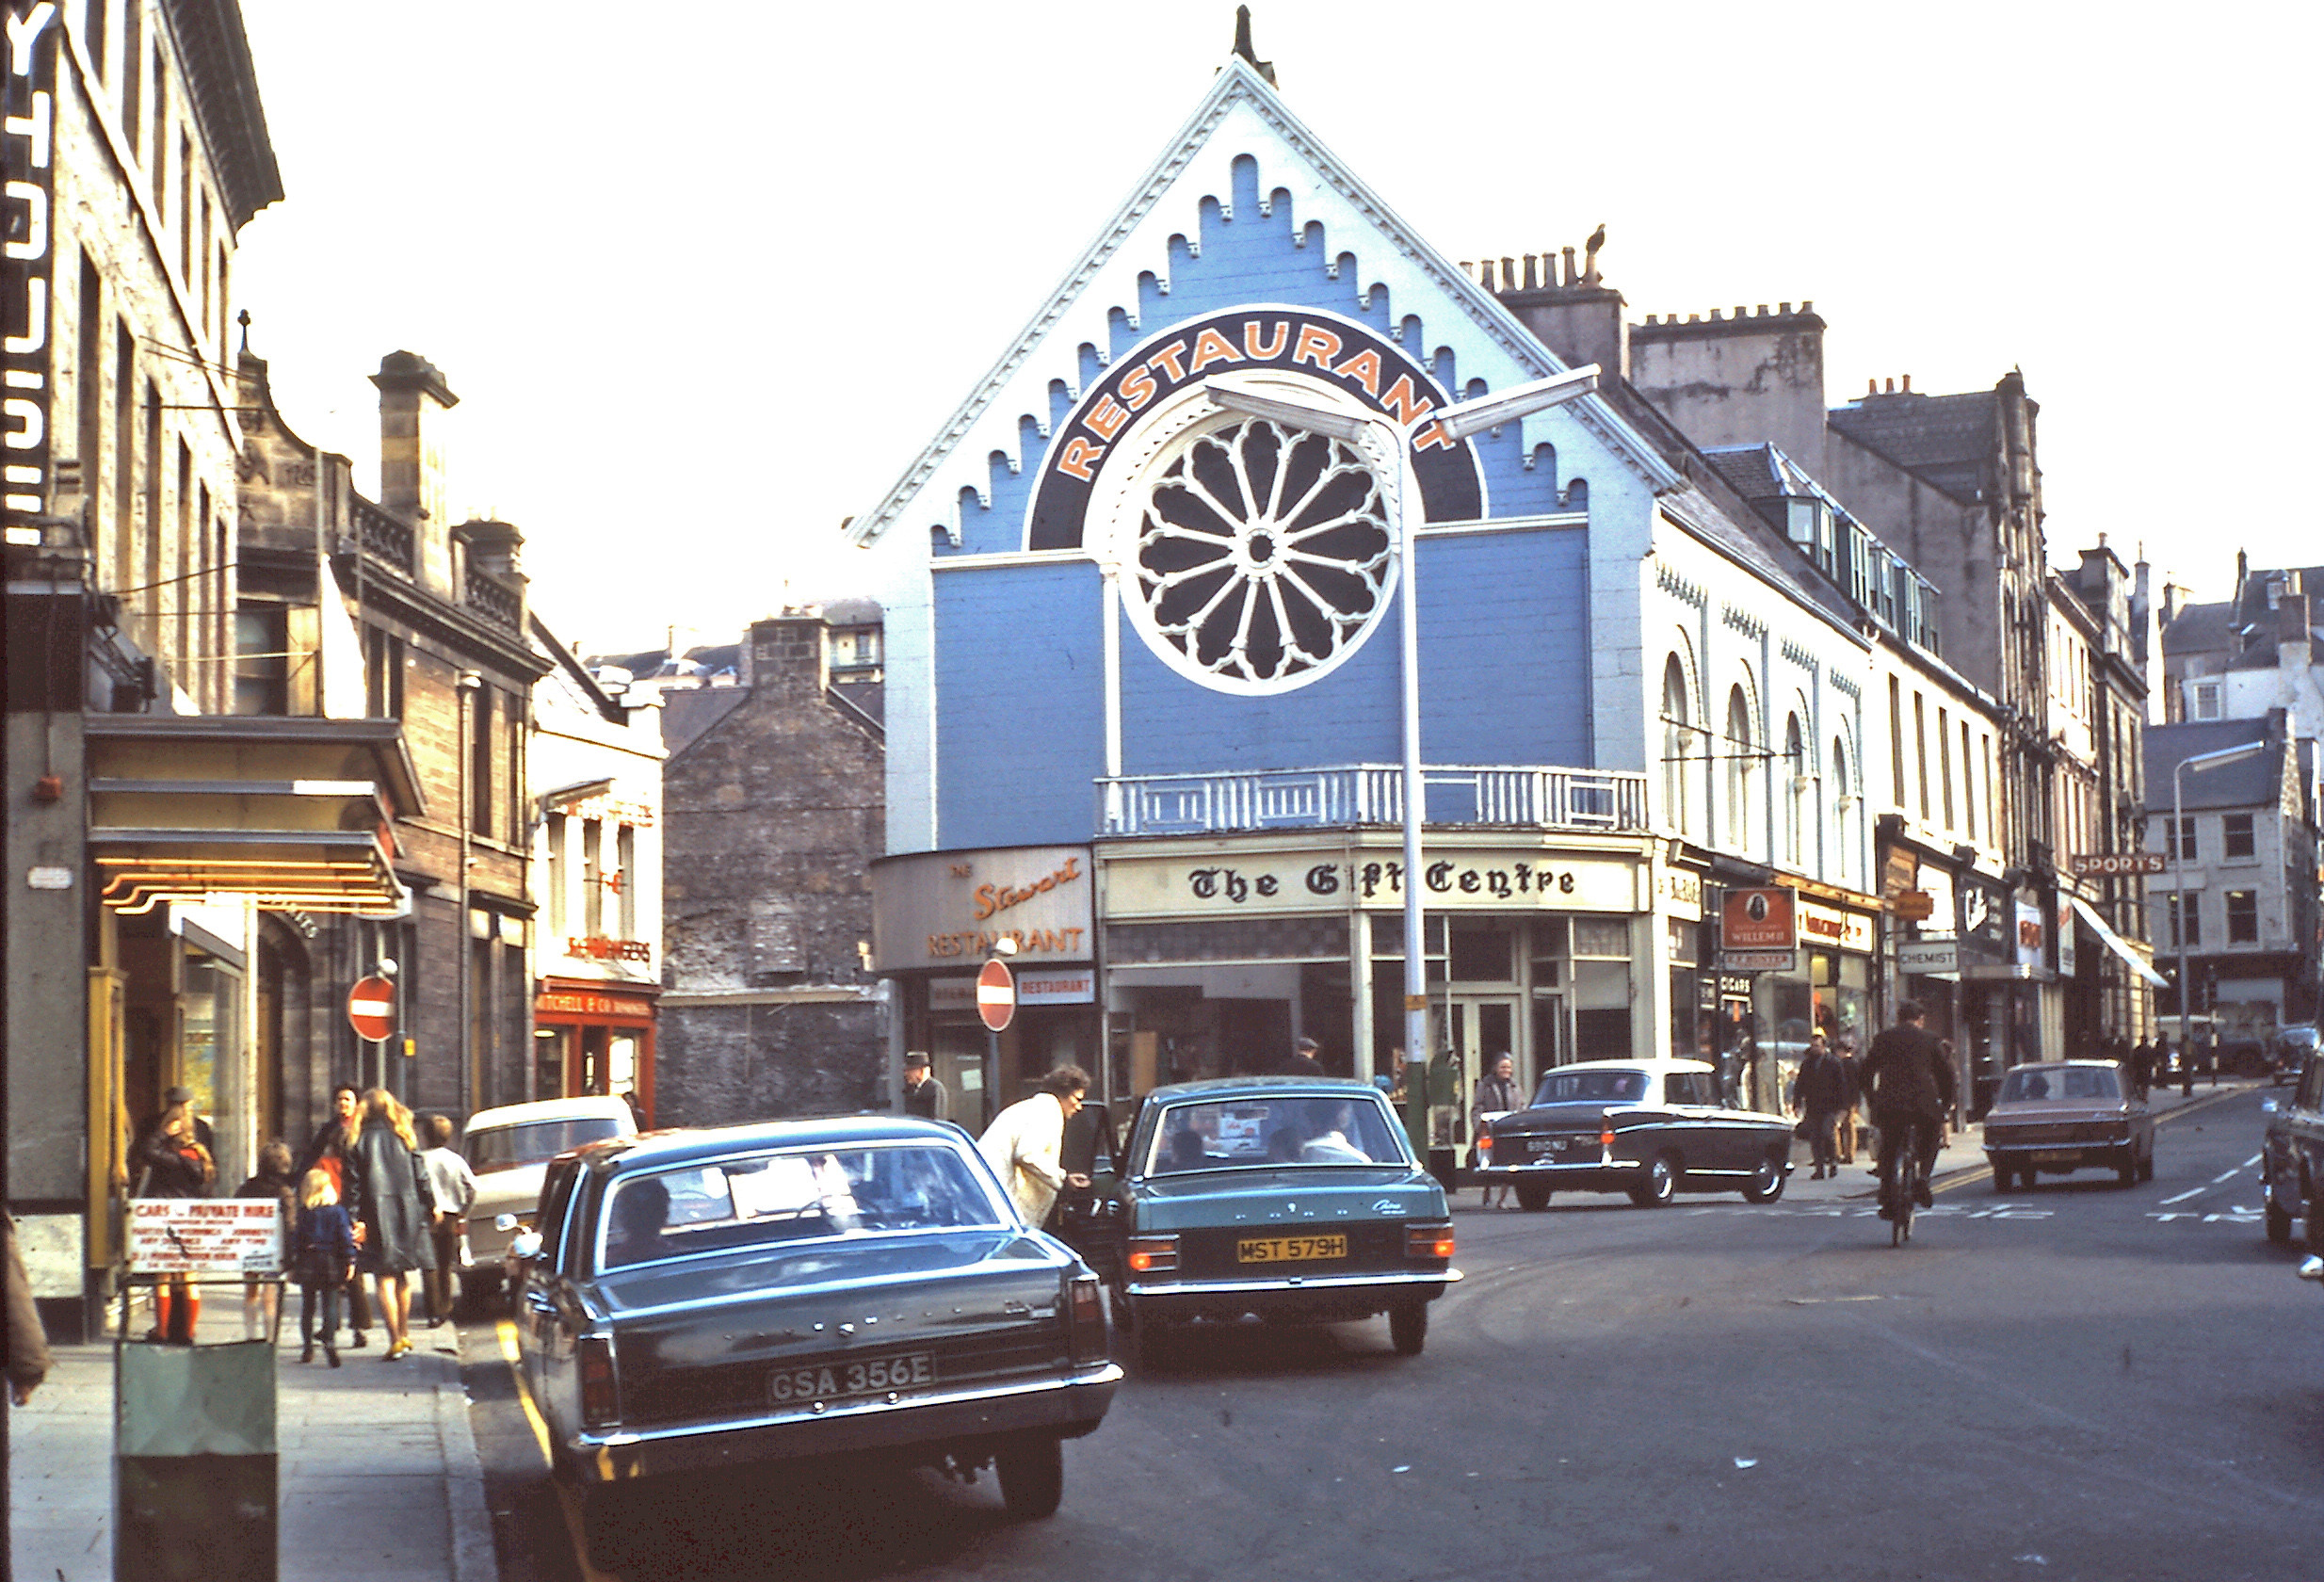 The Rose Window in the centre of a blue painted building on the site of the Old Methodist Chapel, Inverness.